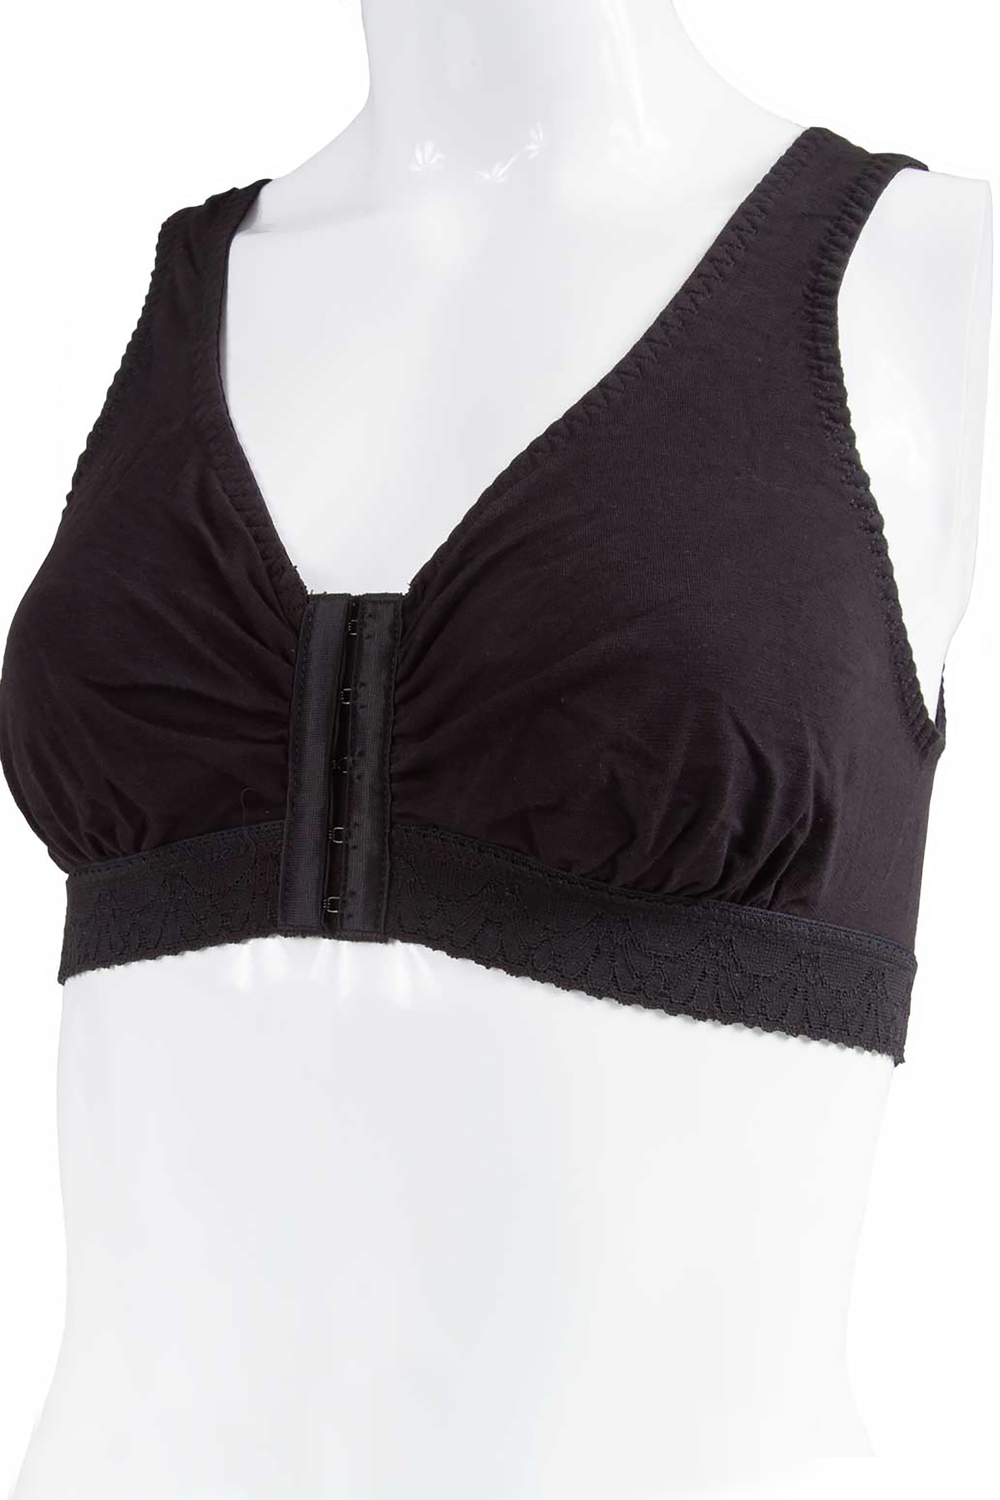 Women's Cotton Wide Strap Bra For Daily use at Rs 62/piece